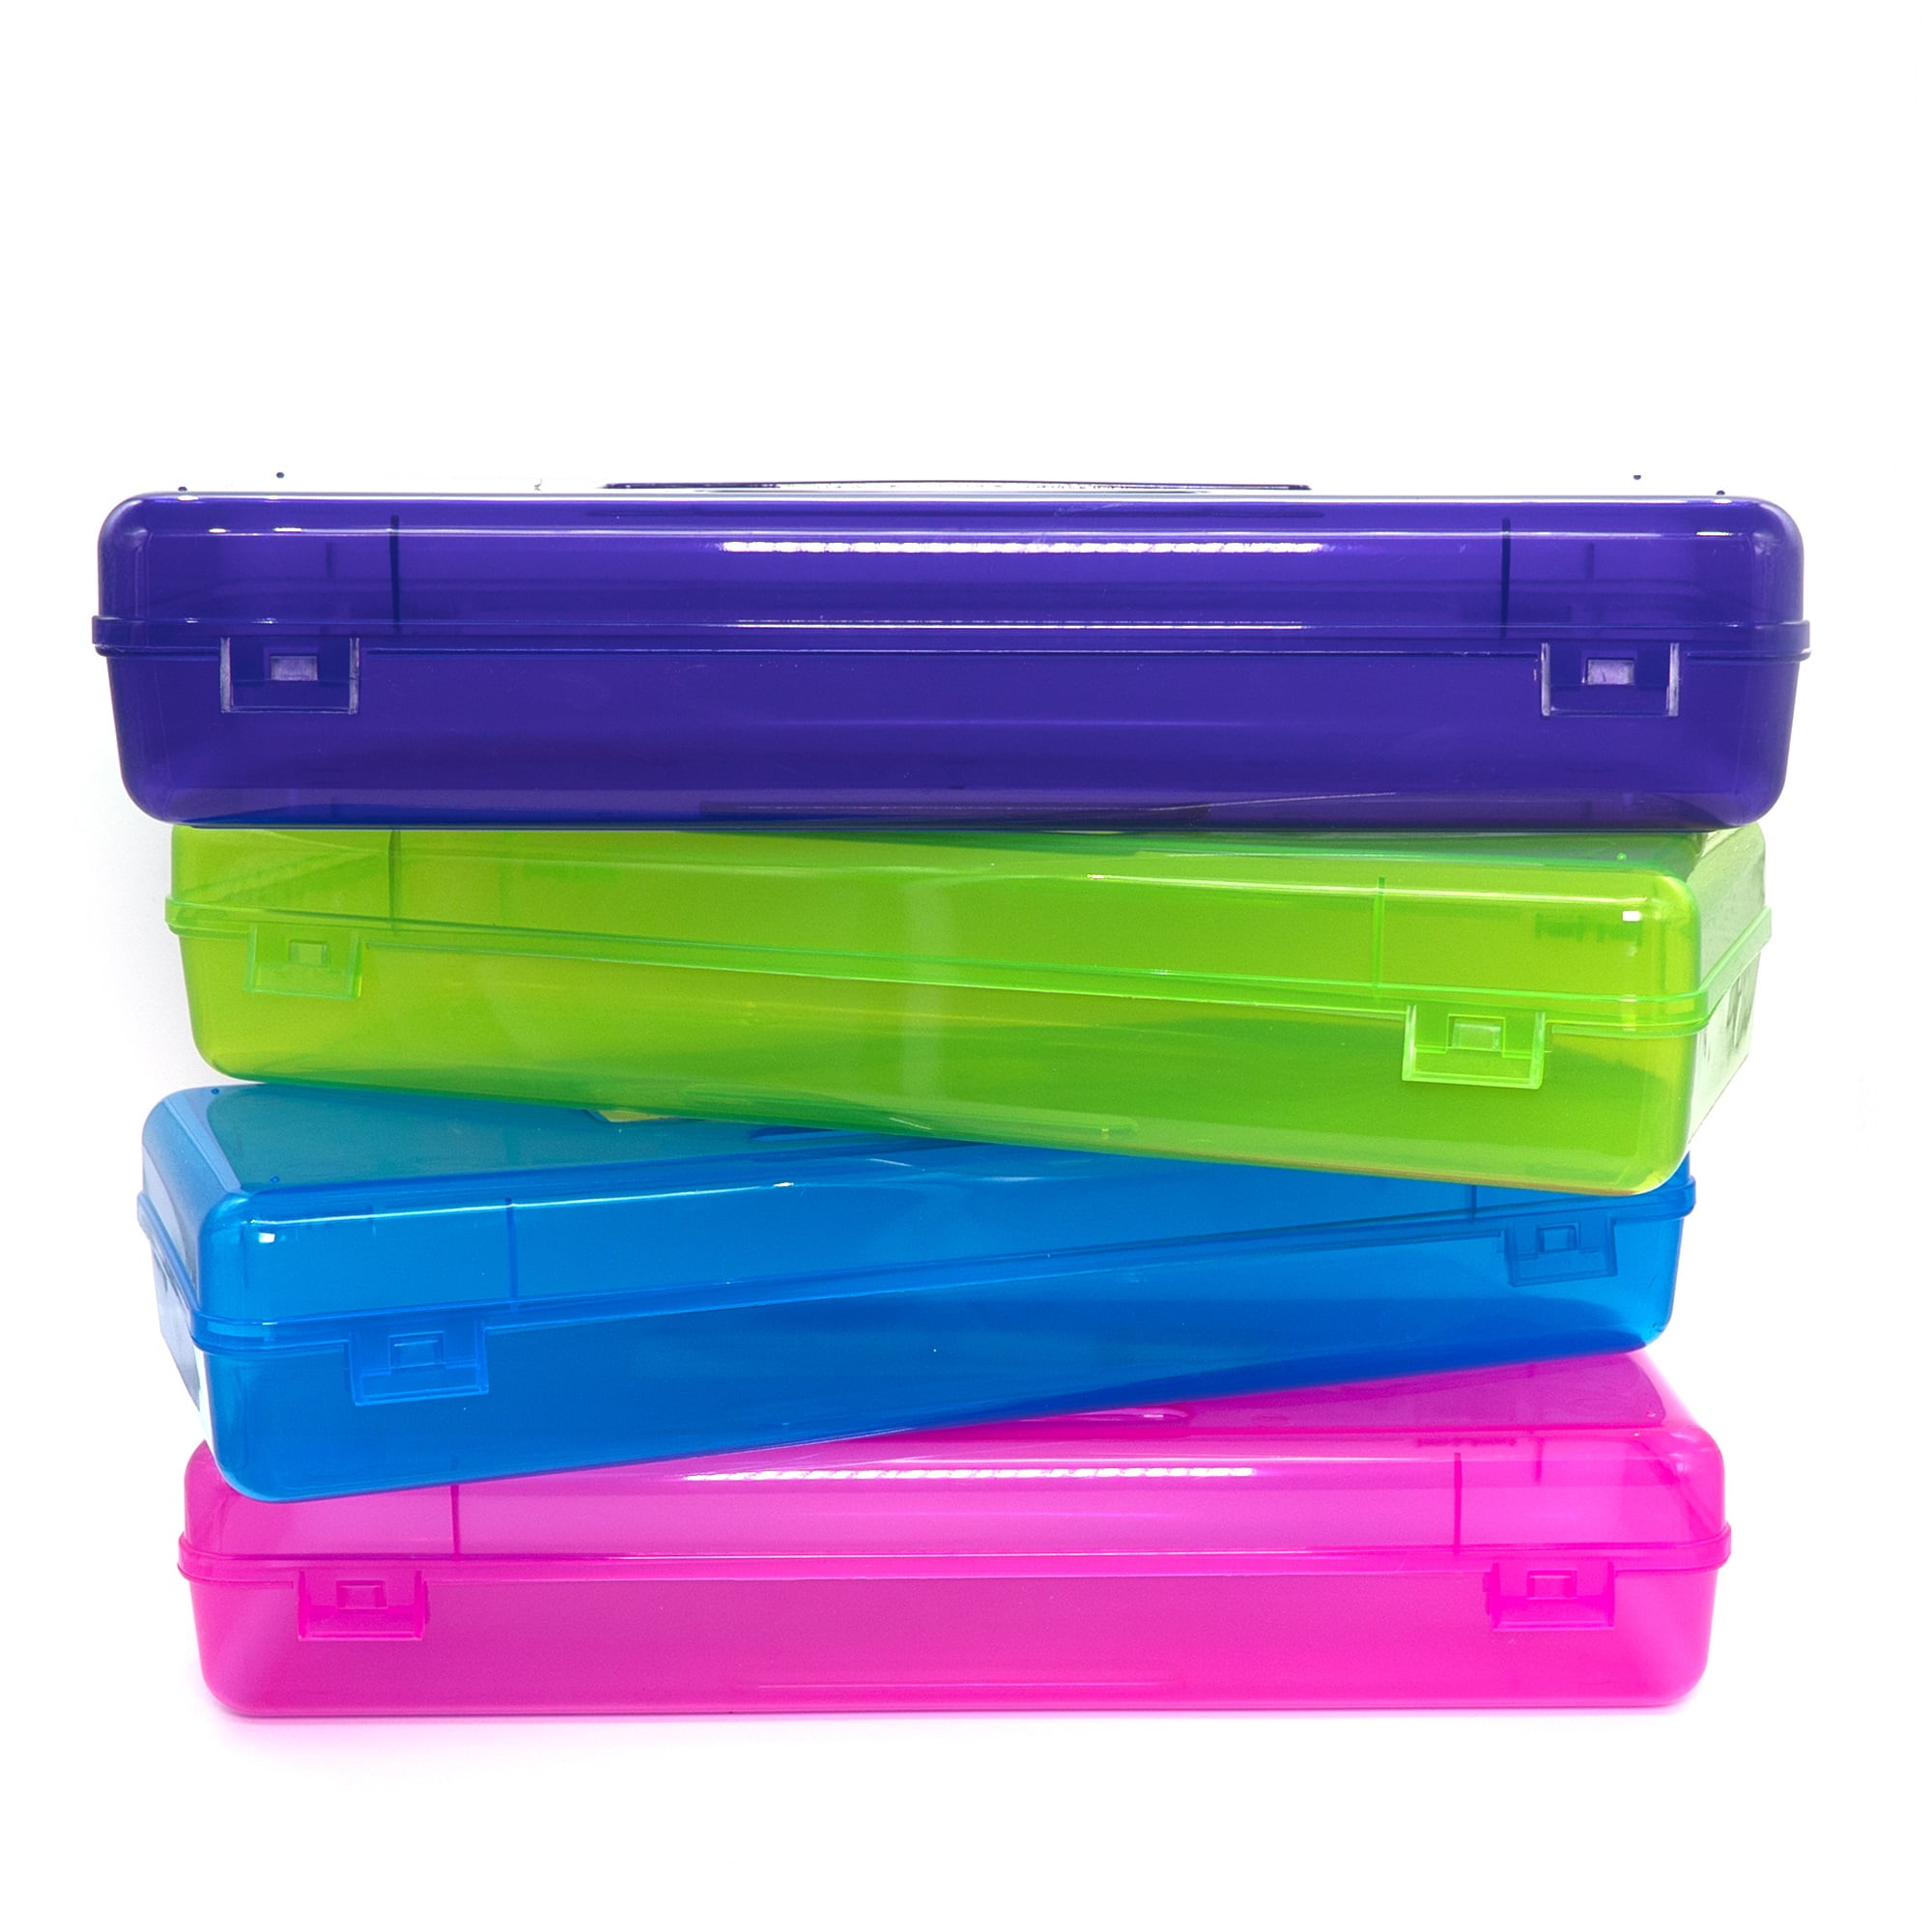 Juvale Pencil Box 4 Pack - School Classroom Supplies Pencil Cases - 7.75 x 4.5 x 2.25 Inches